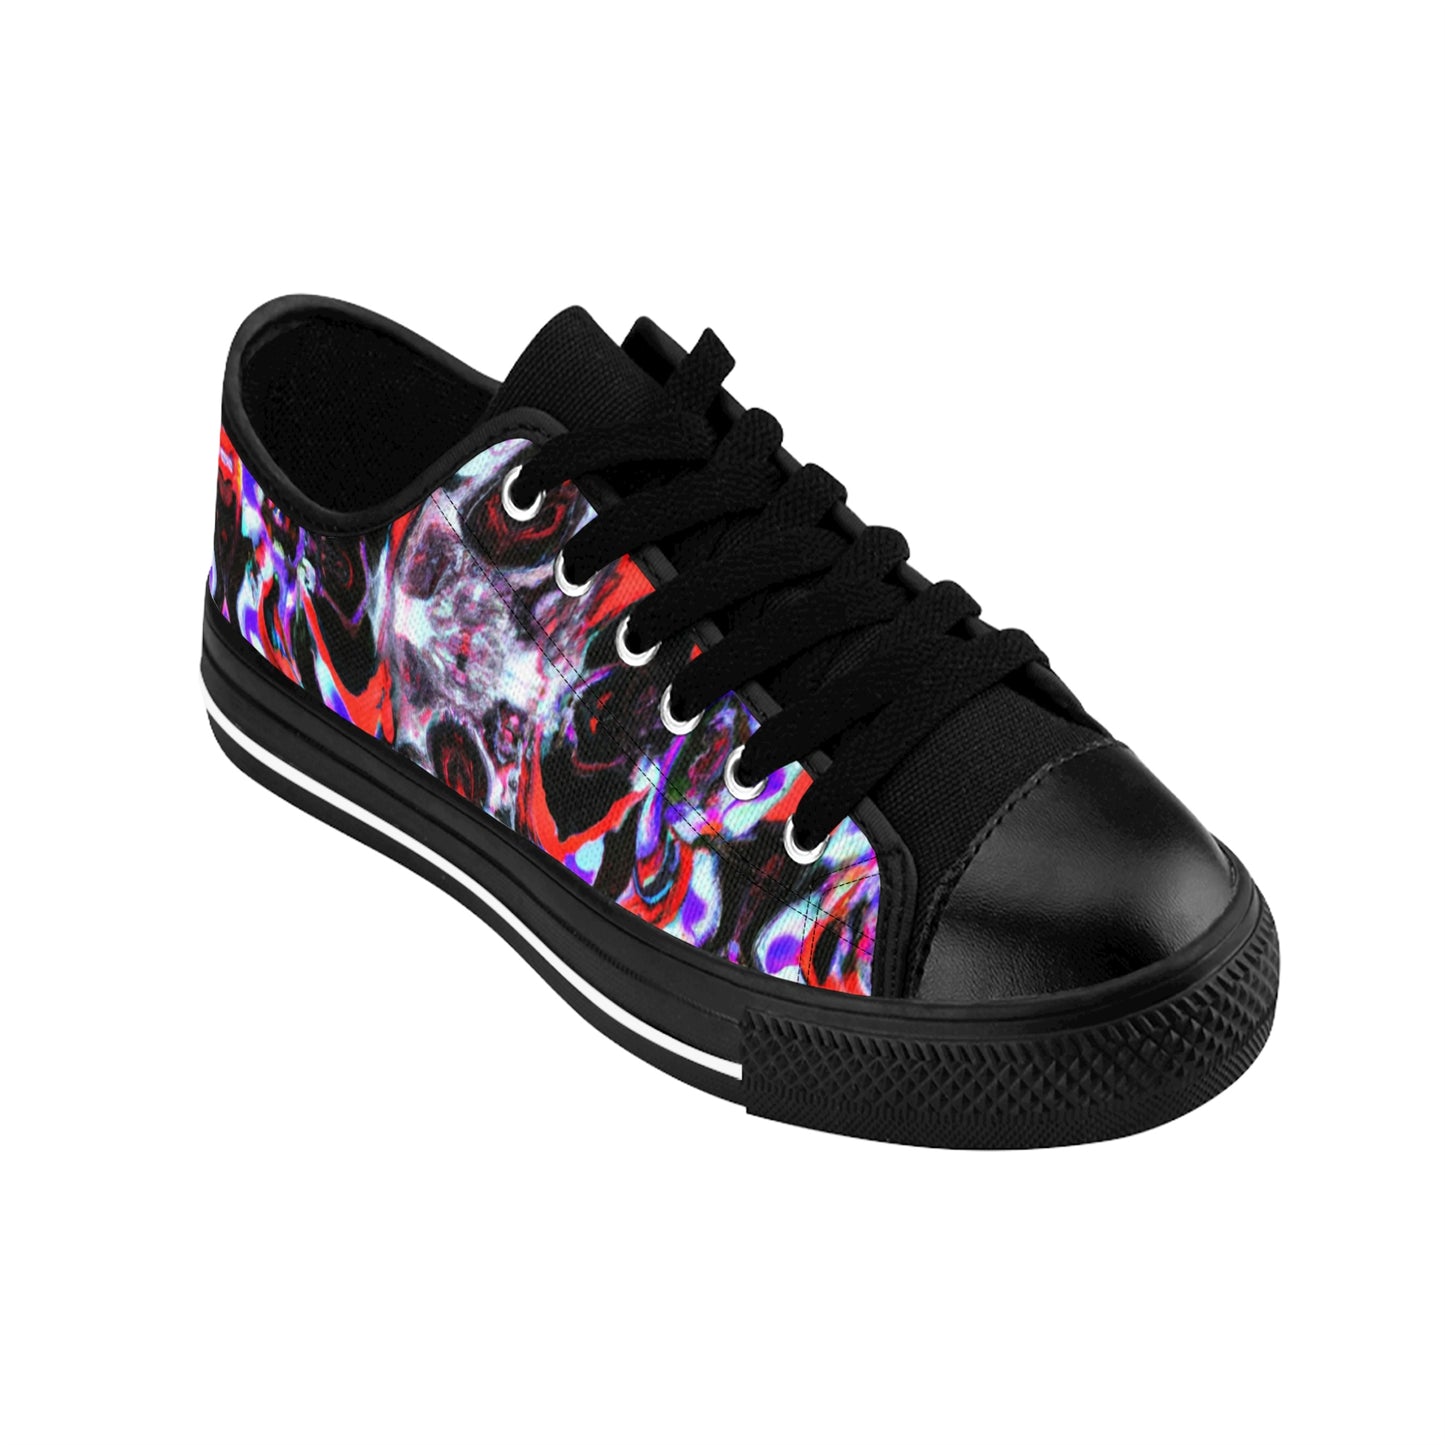 .

Oswin the Shoe Maker - Psychedelic Low Top